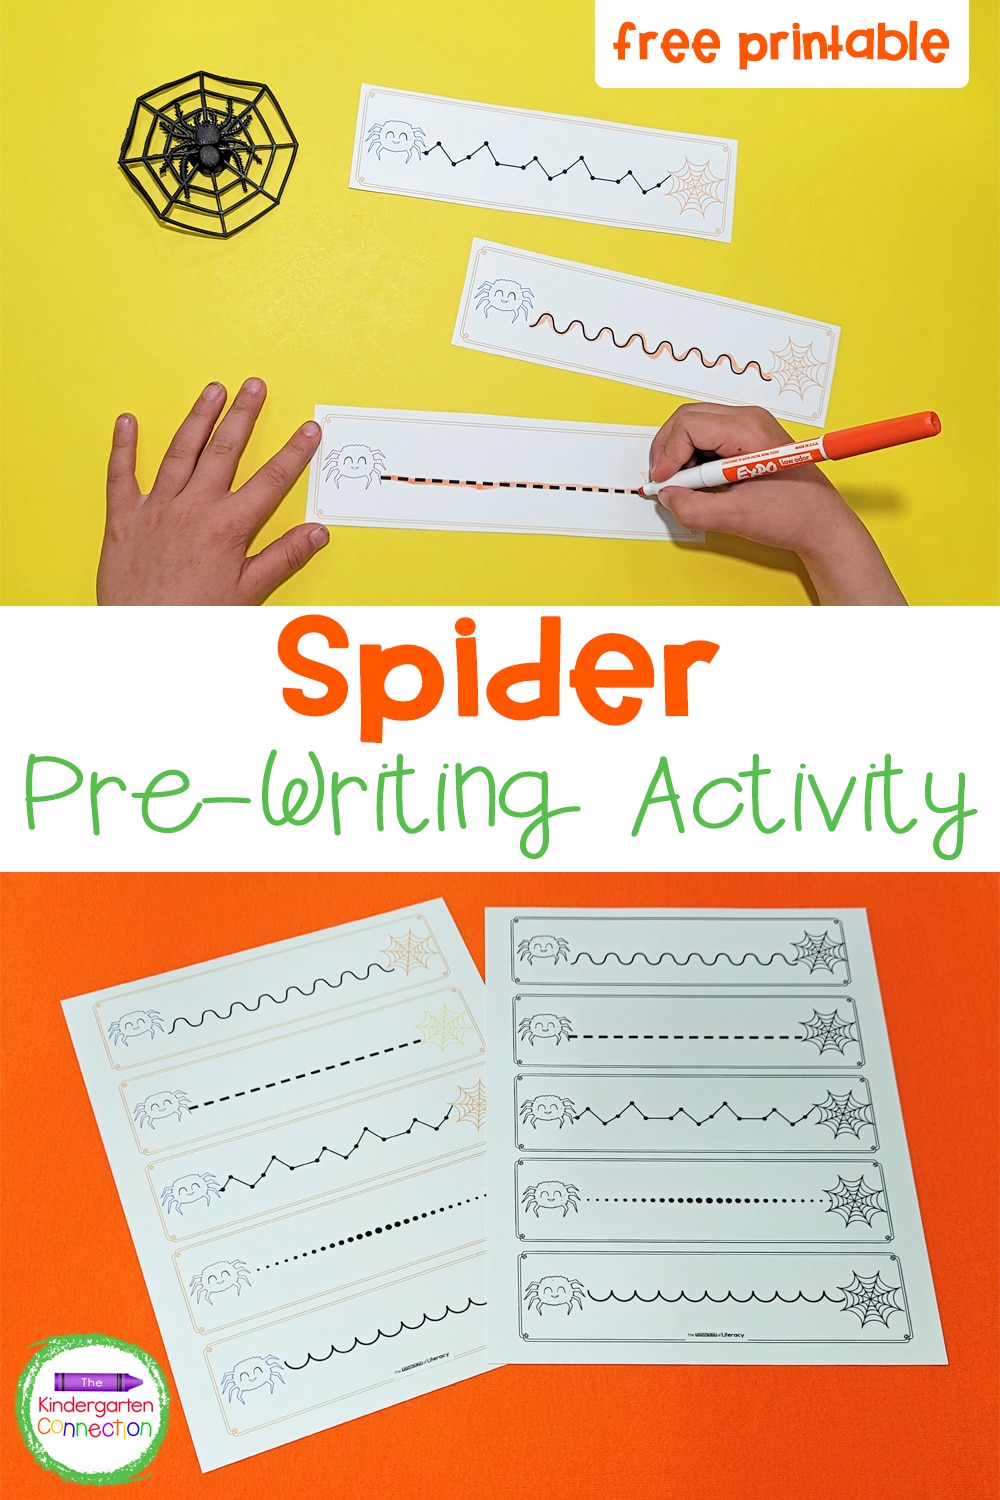 These free Spider Pre-Writing Practice Printables will be great to have on hand to build up pre-writing skills and fine motor muscles!